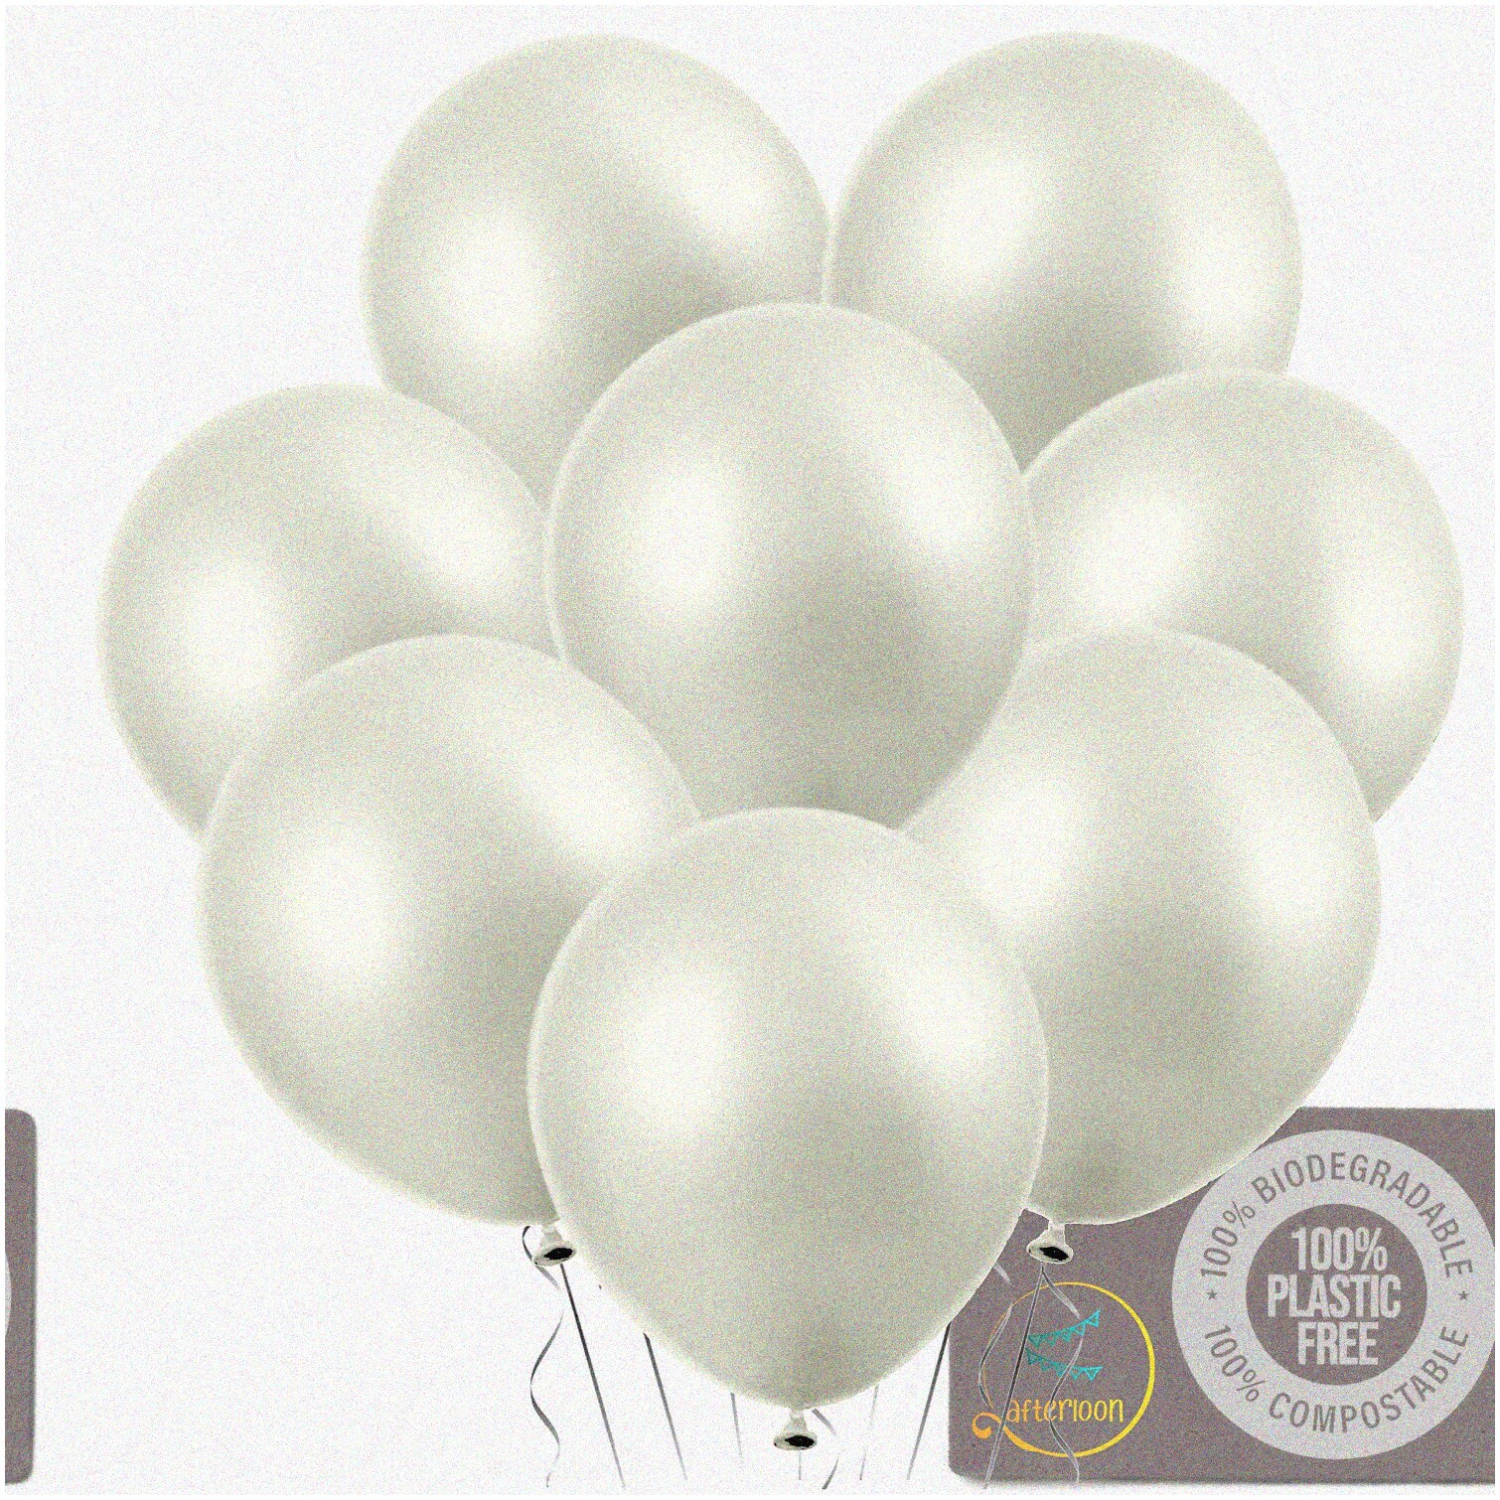 EcoPearl Mini Balloons - 100 pcs Biodegradable, Pearlized White 5 Inch, Extra Strong Latex Helium Float. Perfect for Gender Reveal, Wedding, Birthday Party!